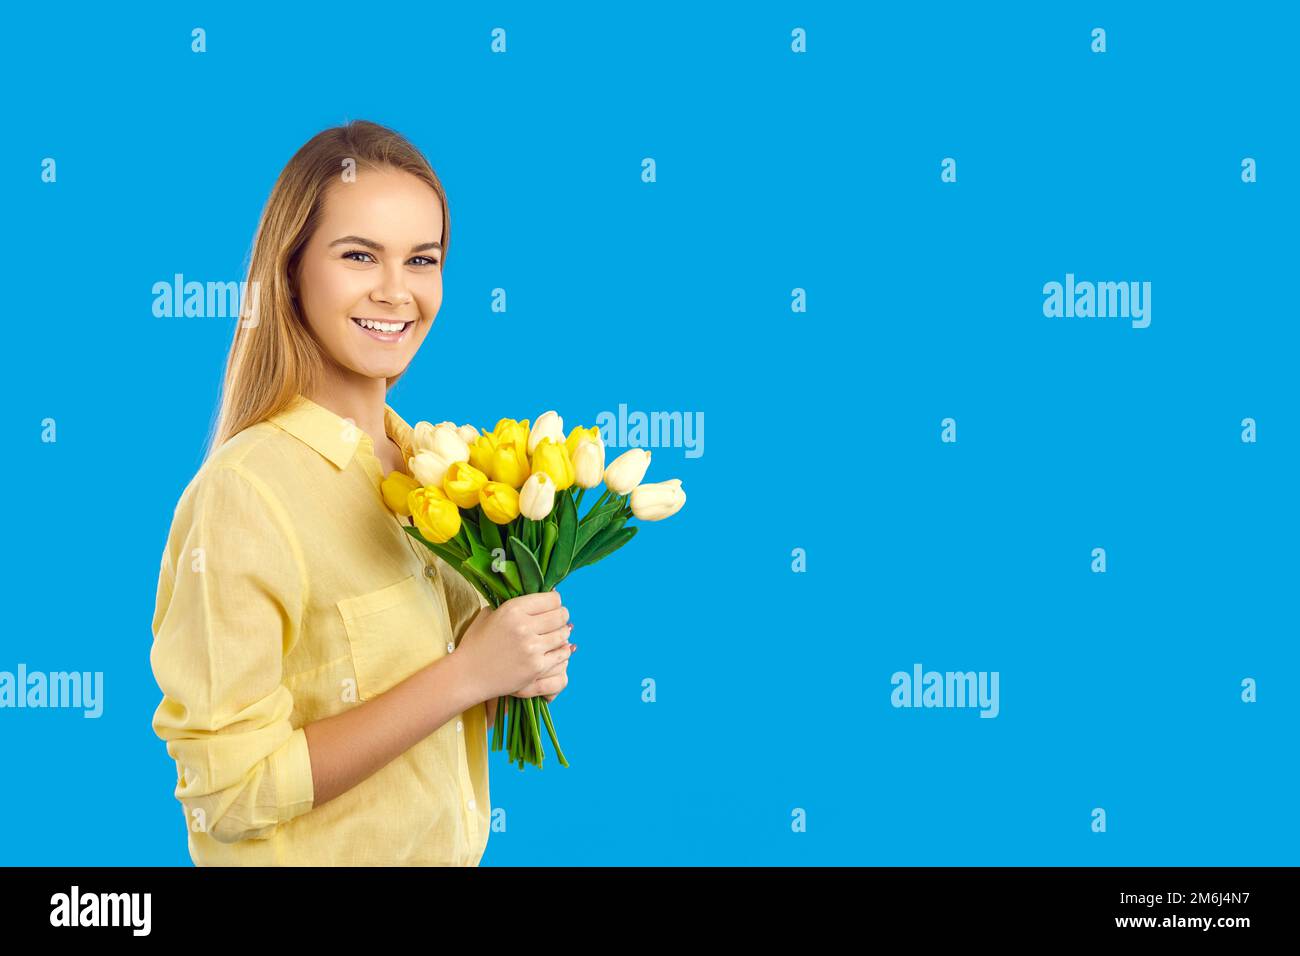 Smiling woman hold flower bouquet in hands Stock Photo